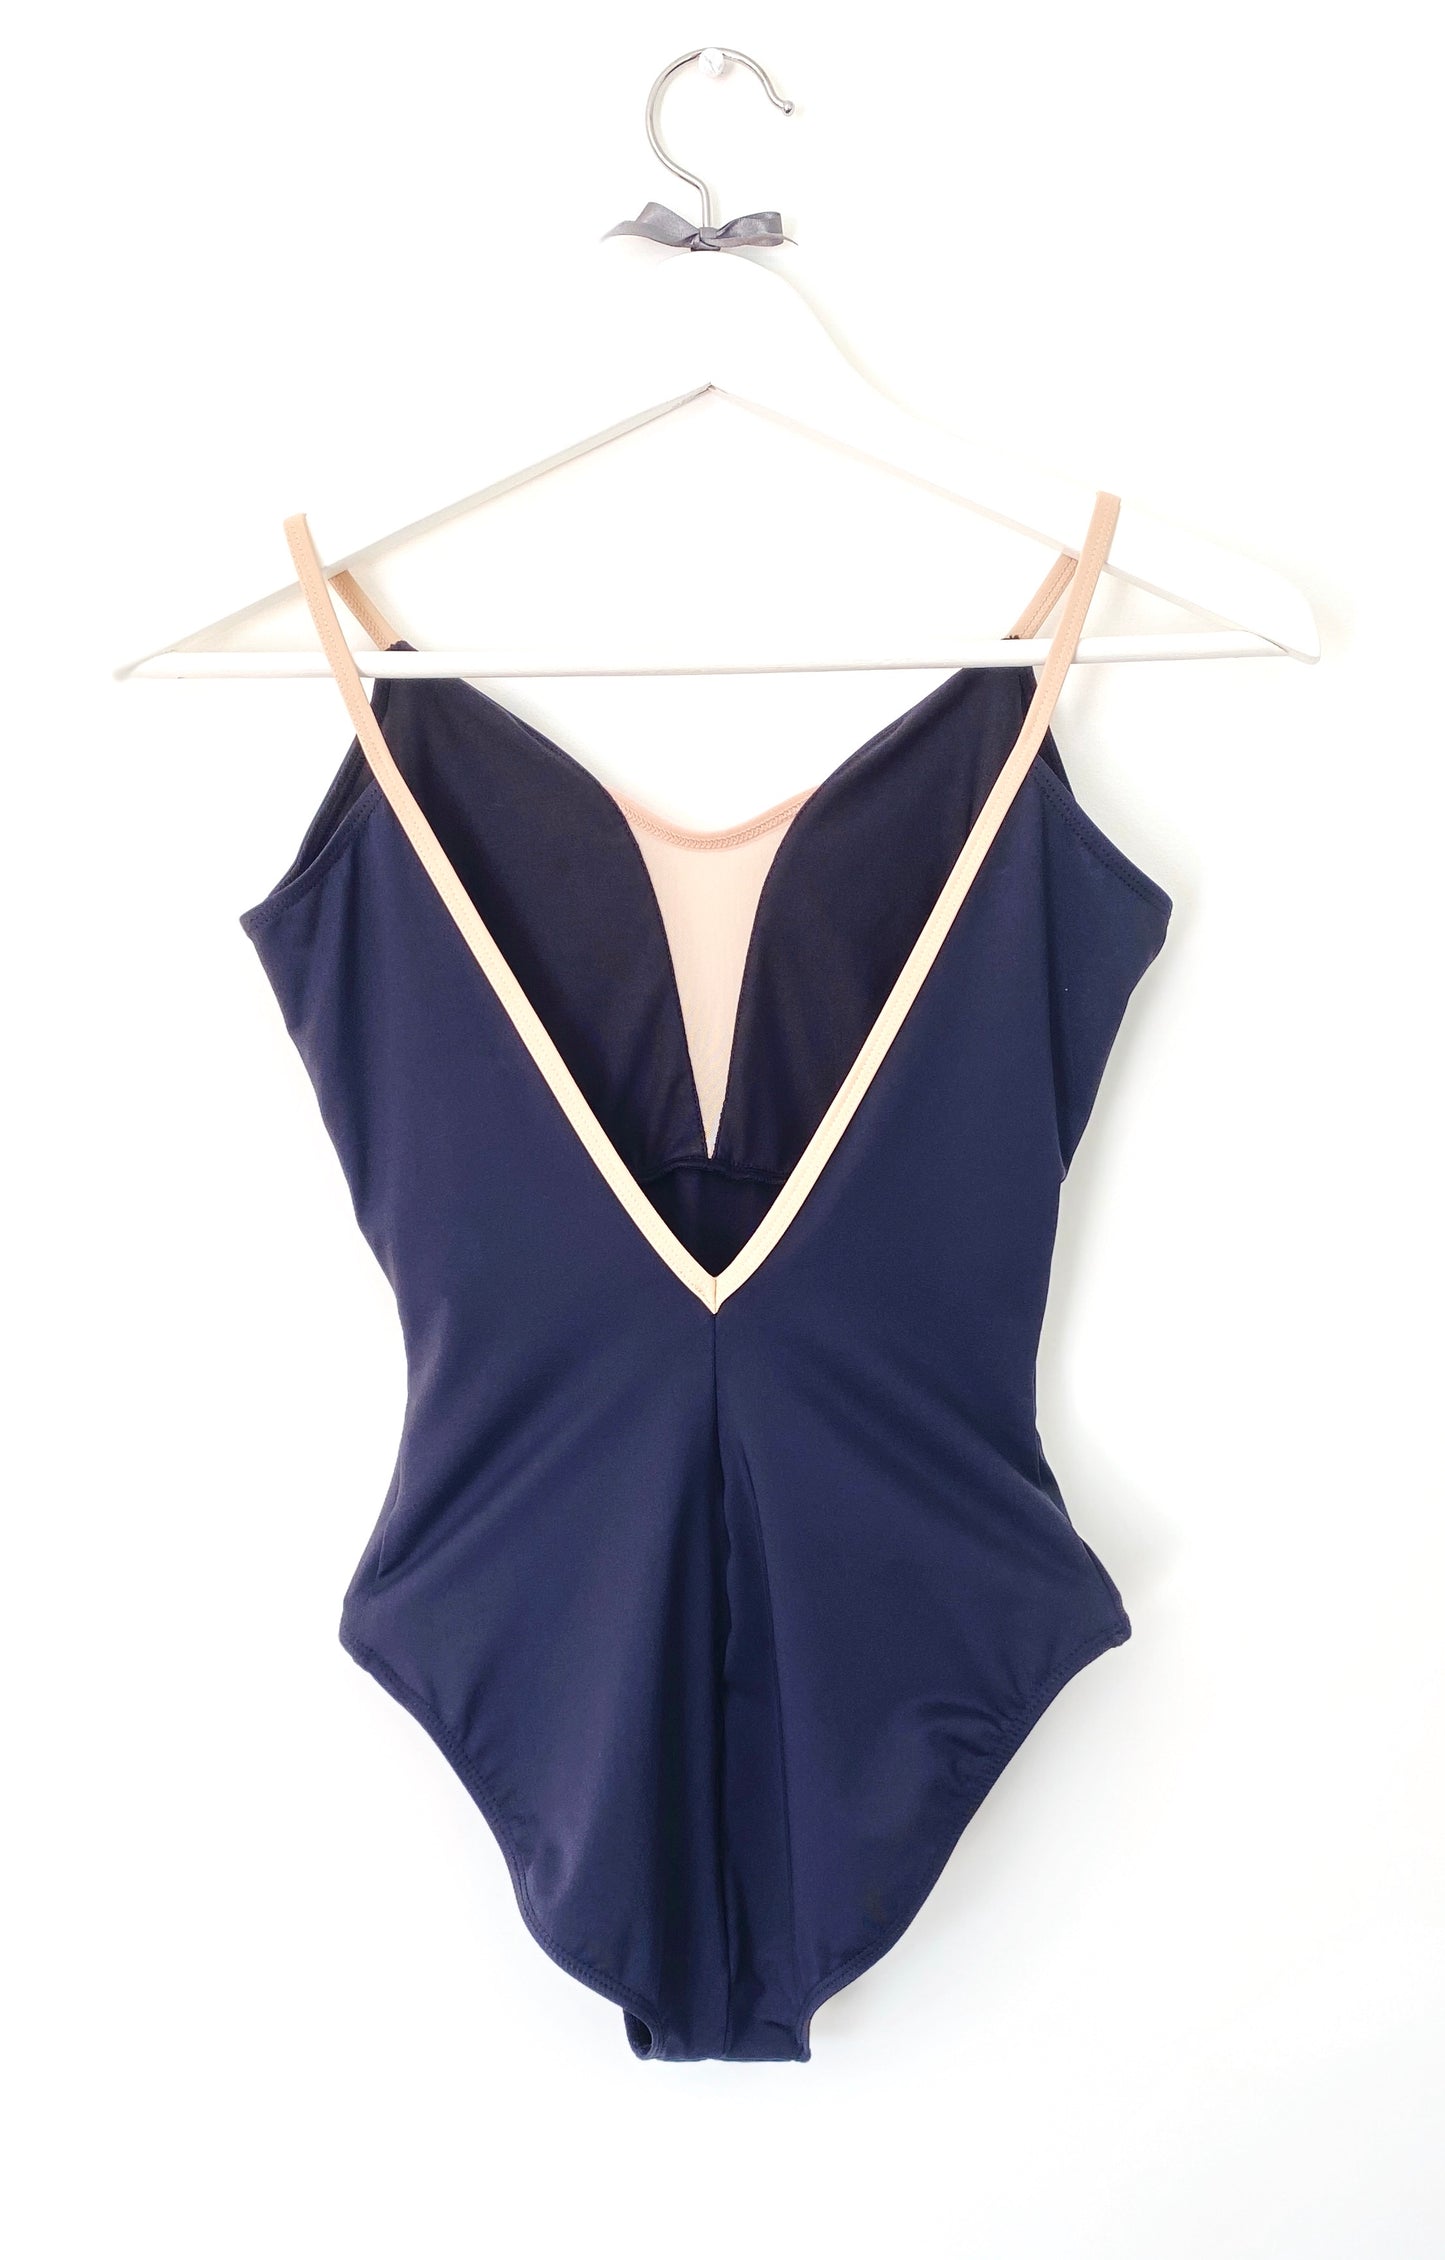 V-mesh camisole leotard in black with a deep back from The Collective Dancewear